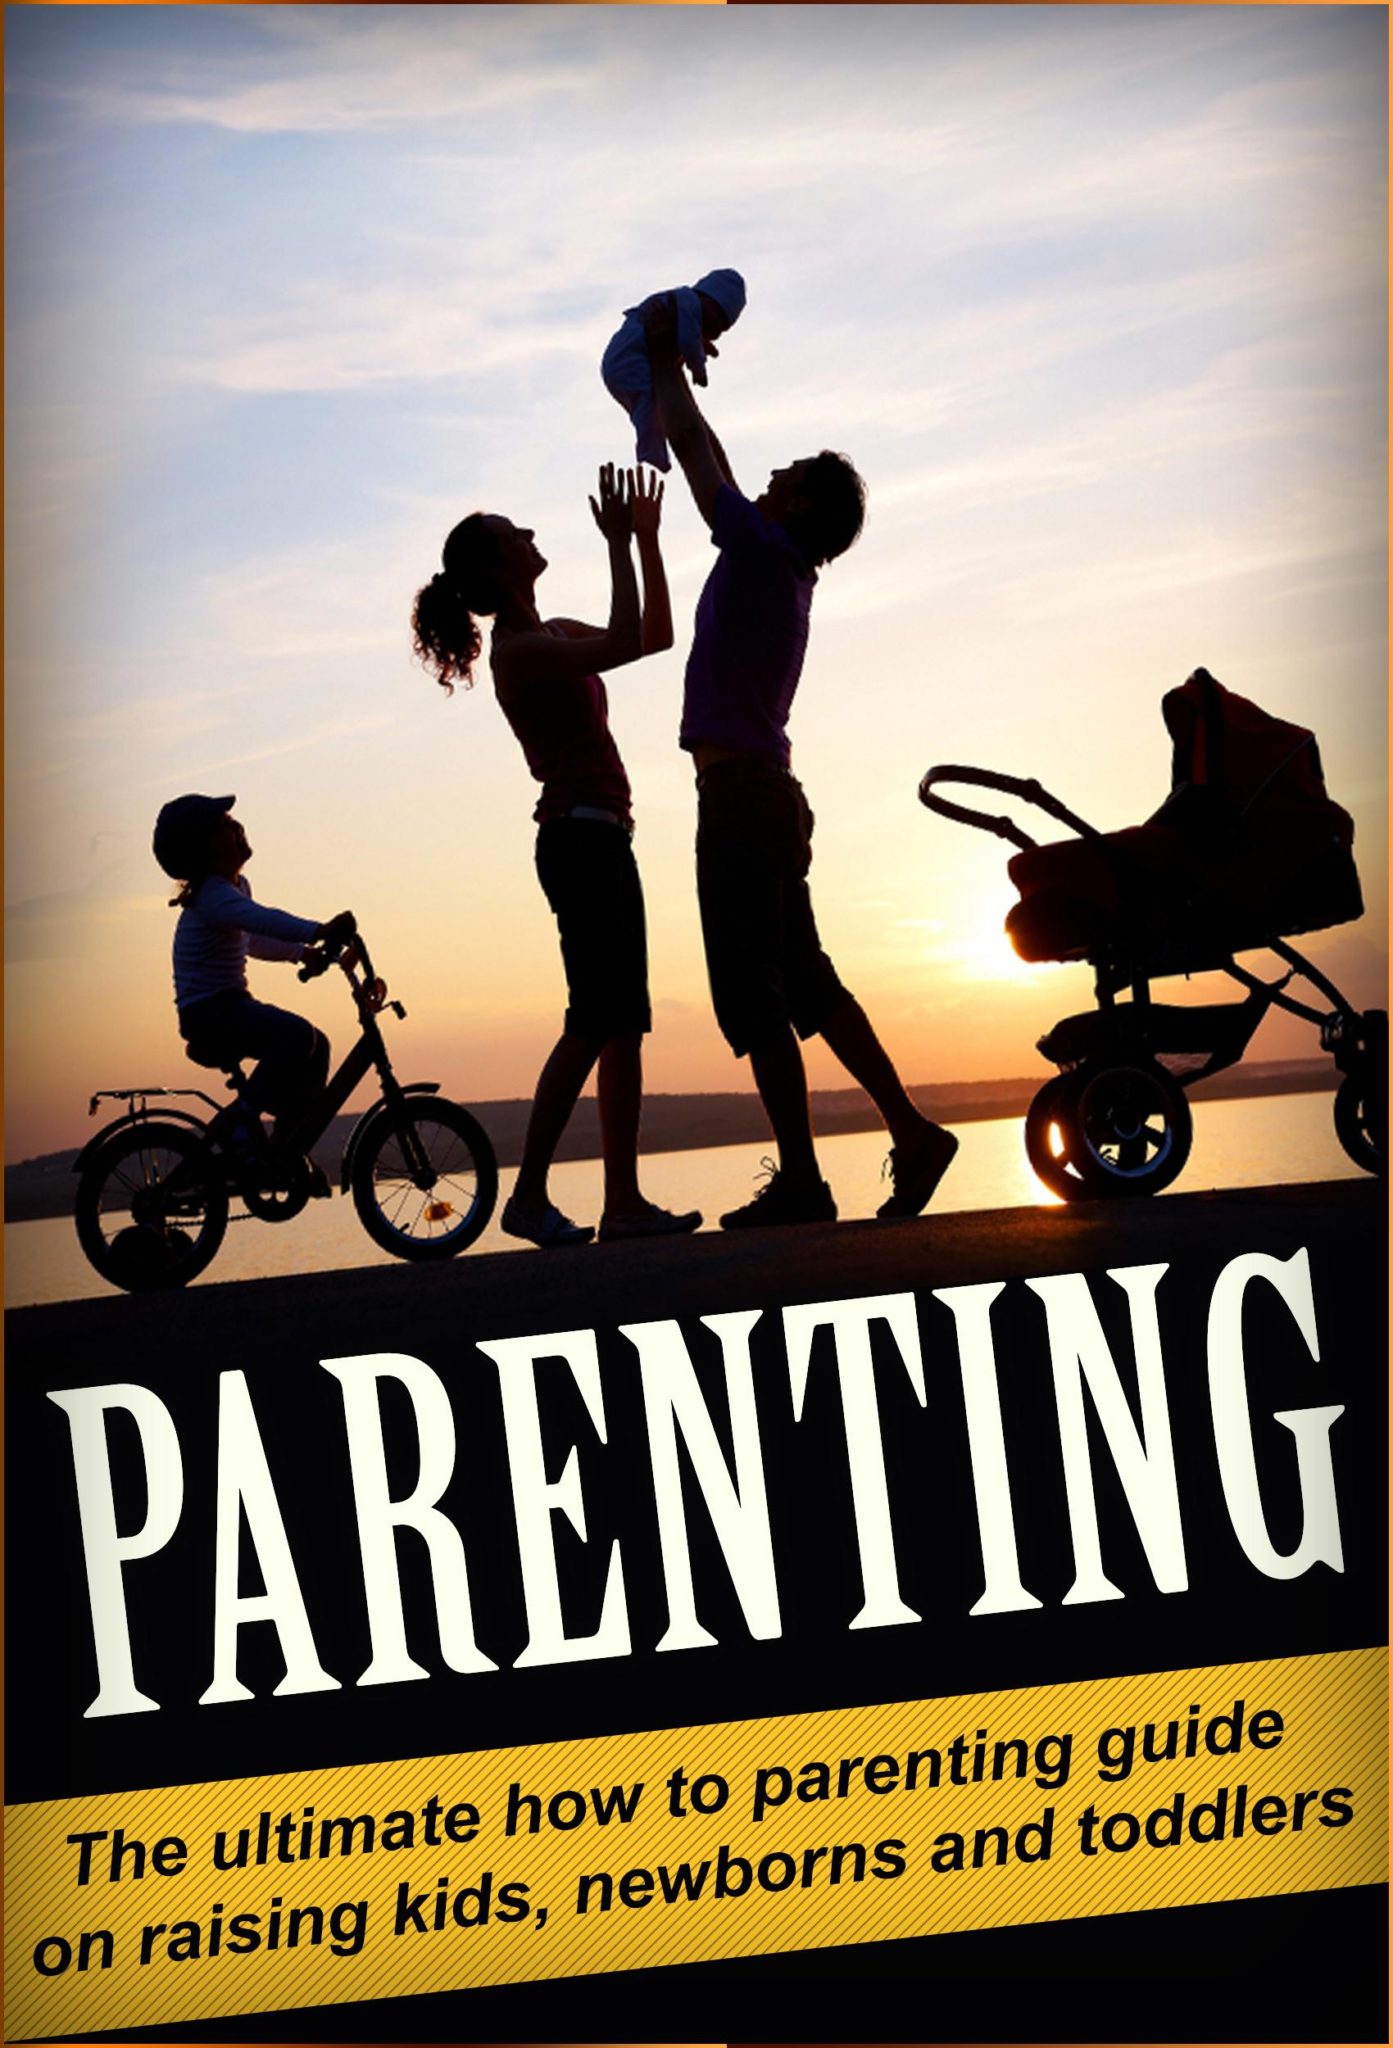 FREE: Parenting: The Ultimate How to Parenting Guide on Raising Kids, Newborns and Toddlers by Mary Appleton